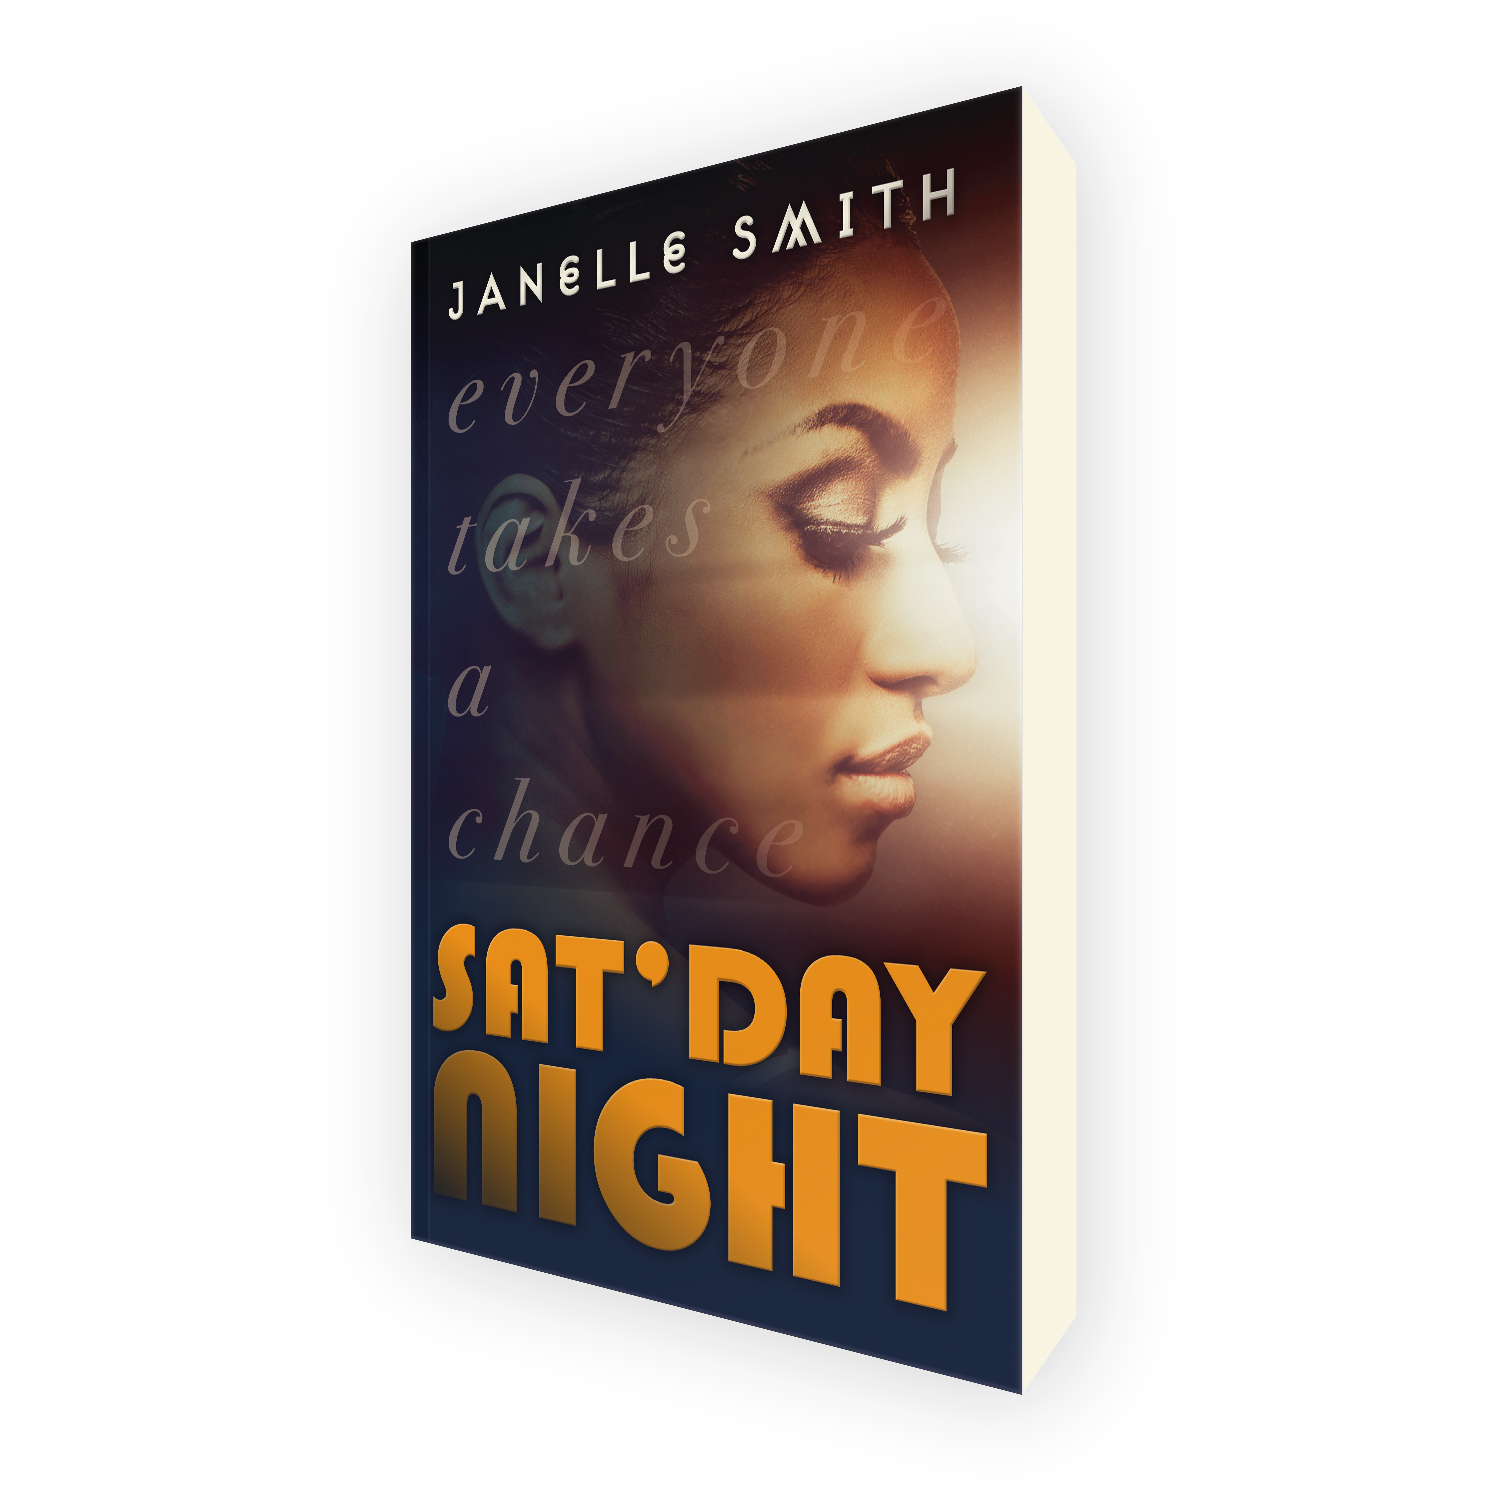 'Sat'Day Night' is a bespoke cover design for a modern dramatic novel. The book cover was designed by Mark Thomas, of coverness.com. To find out more about my book design services, please visit www.coverness.com.